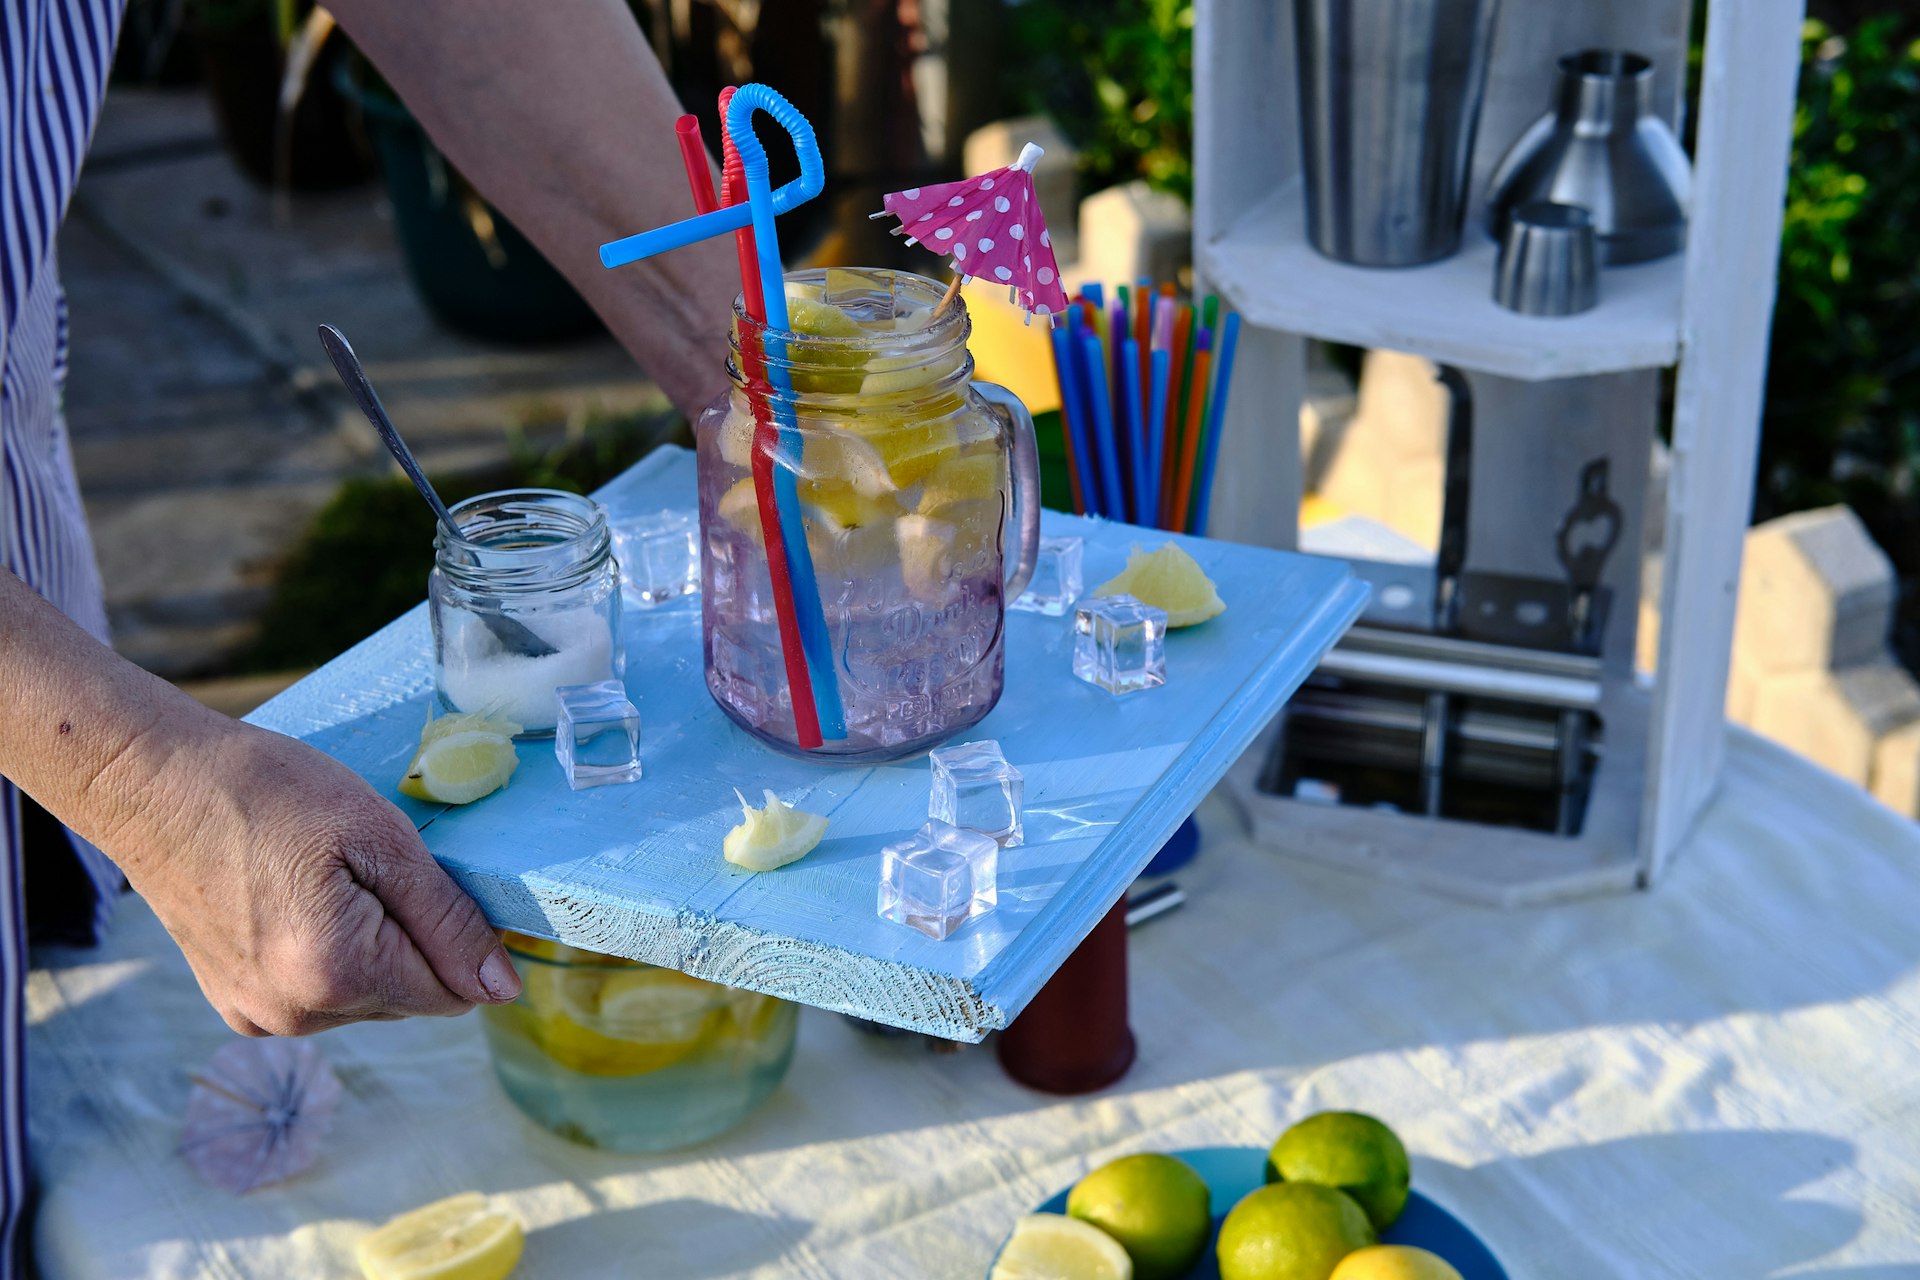 Waitress brings a cocktail on her blue wooden tray